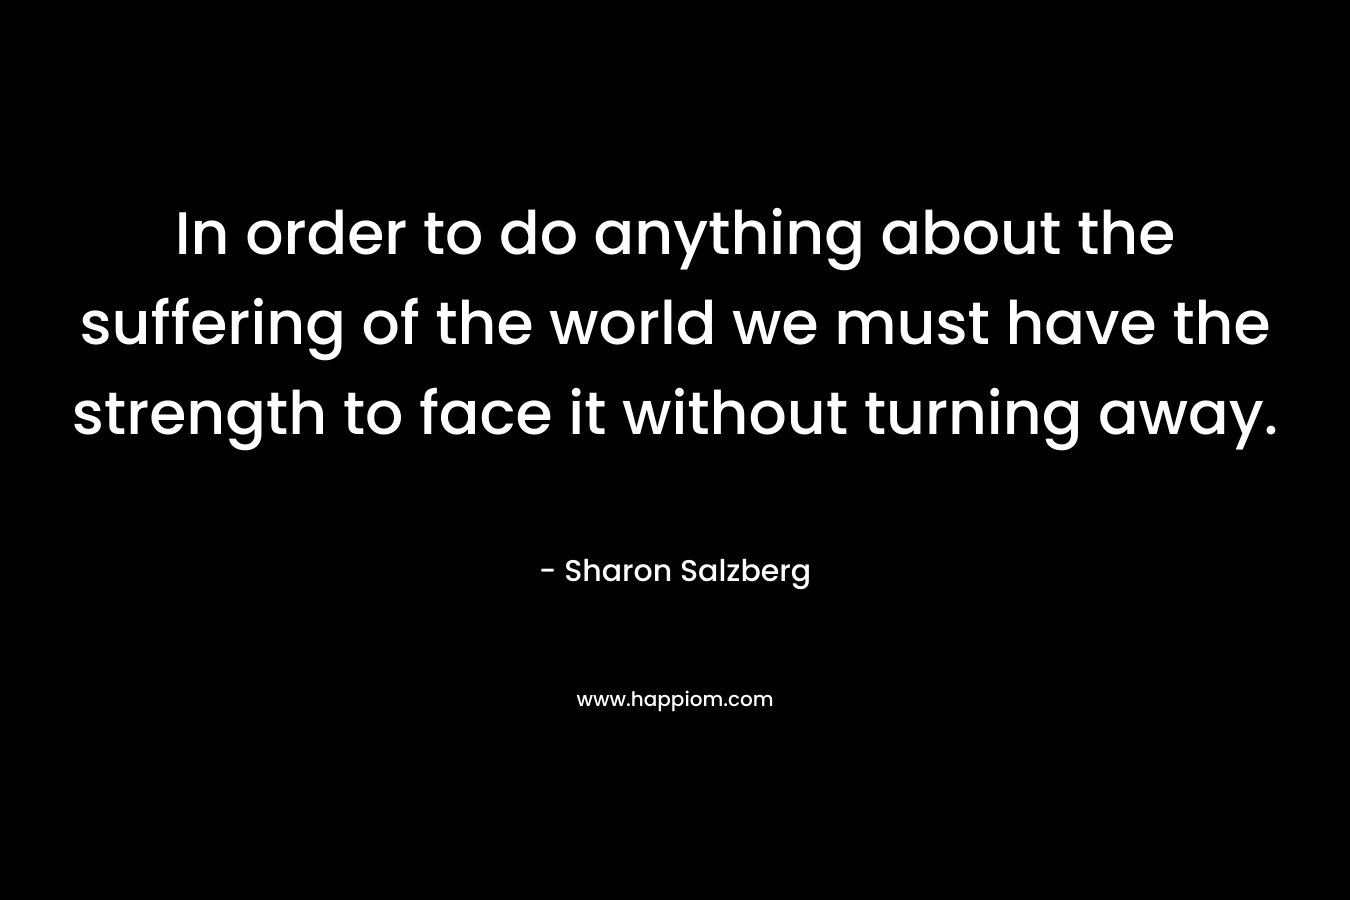 In order to do anything about the suffering of the world we must have the strength to face it without turning away.